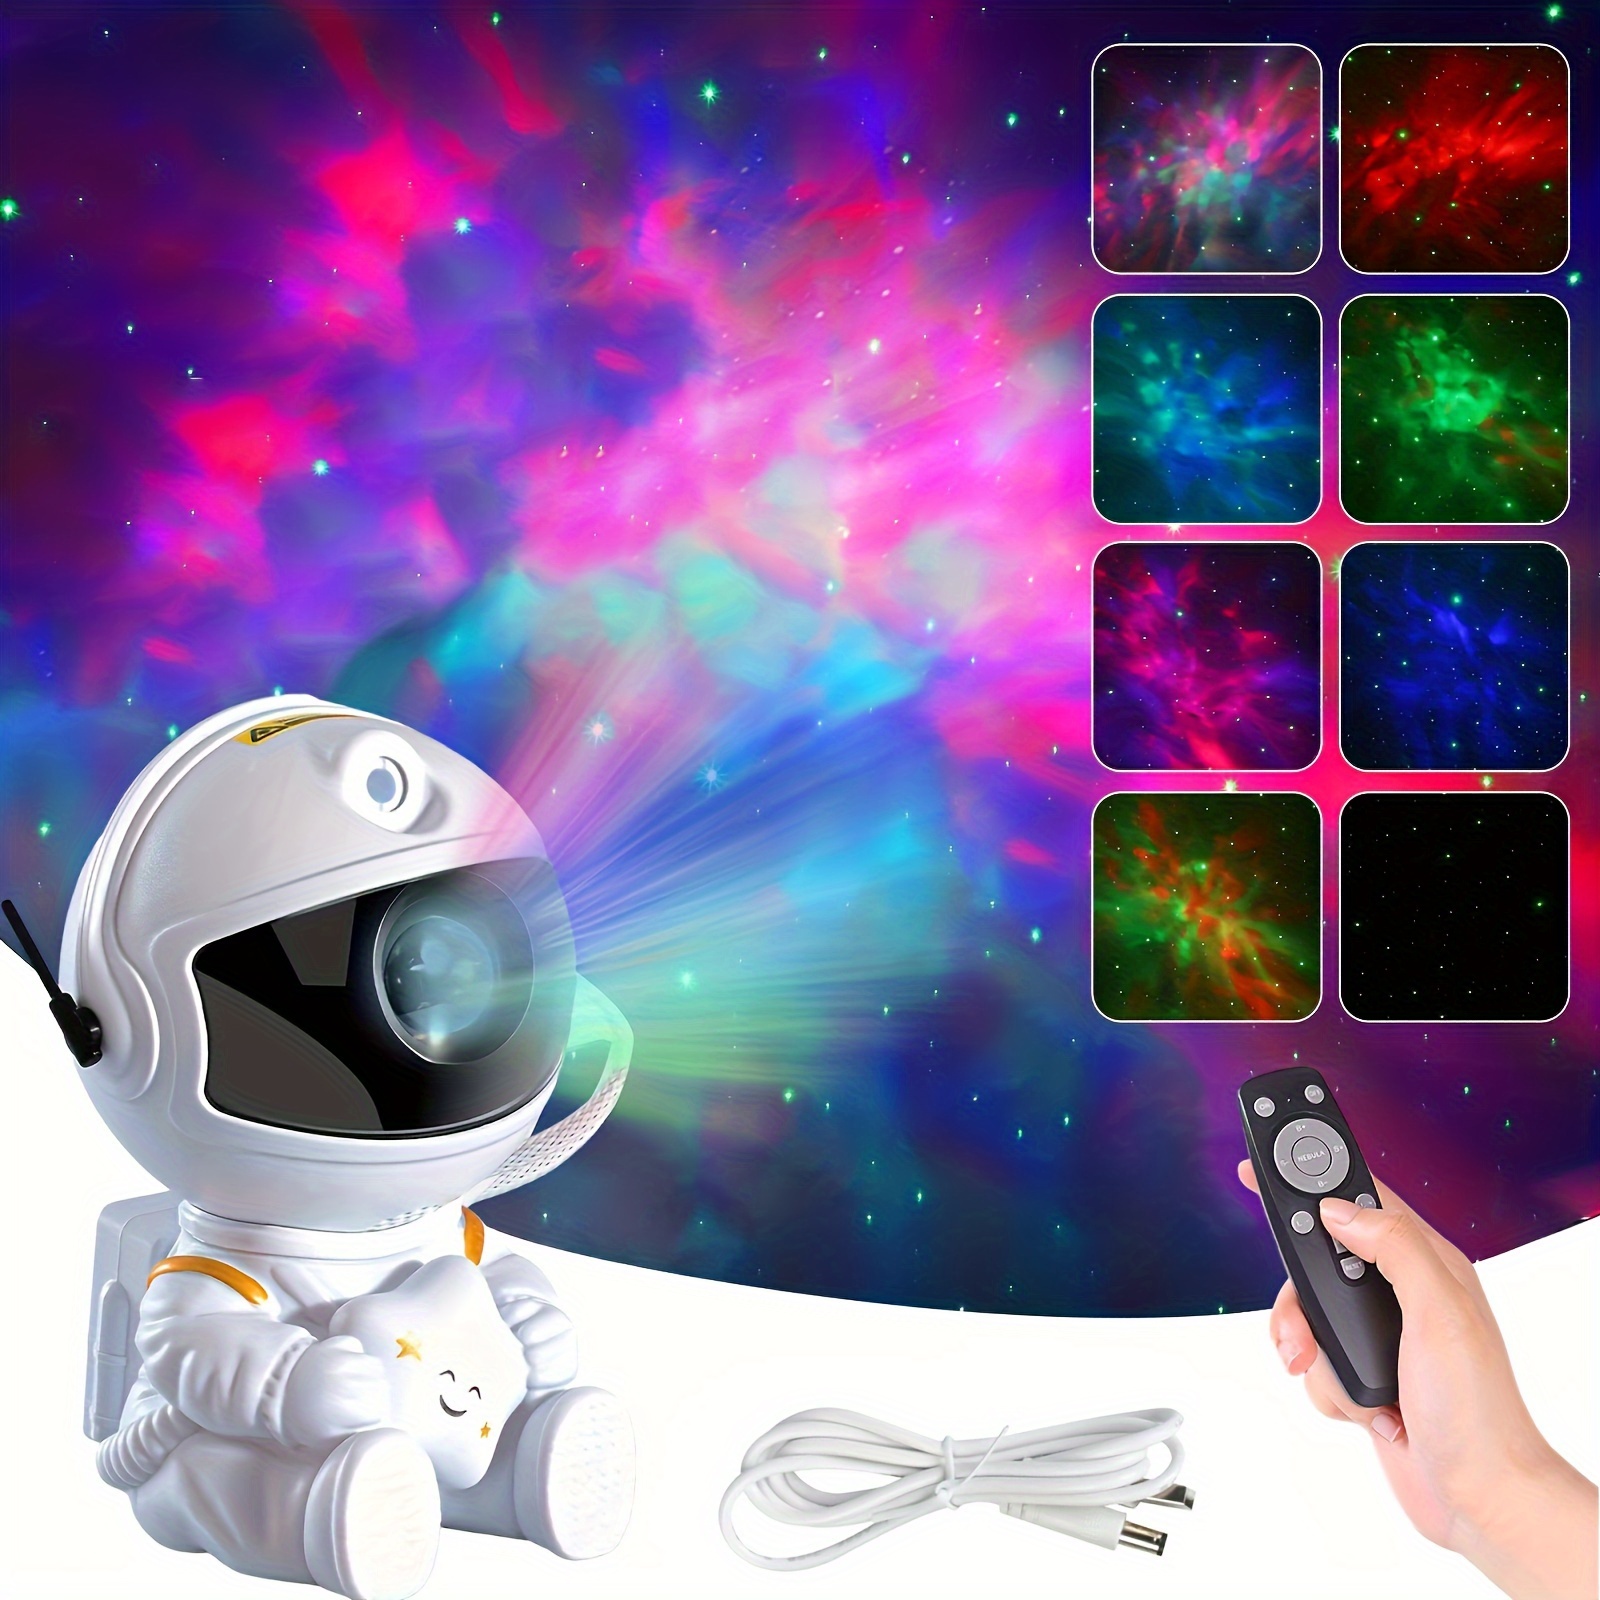 

1pc White Astronaut Led Remote Control Starry Sky Nebula Projection Light, Home Game Room Atmosphere Decorative Light, Christmas Gift (without Electricity)